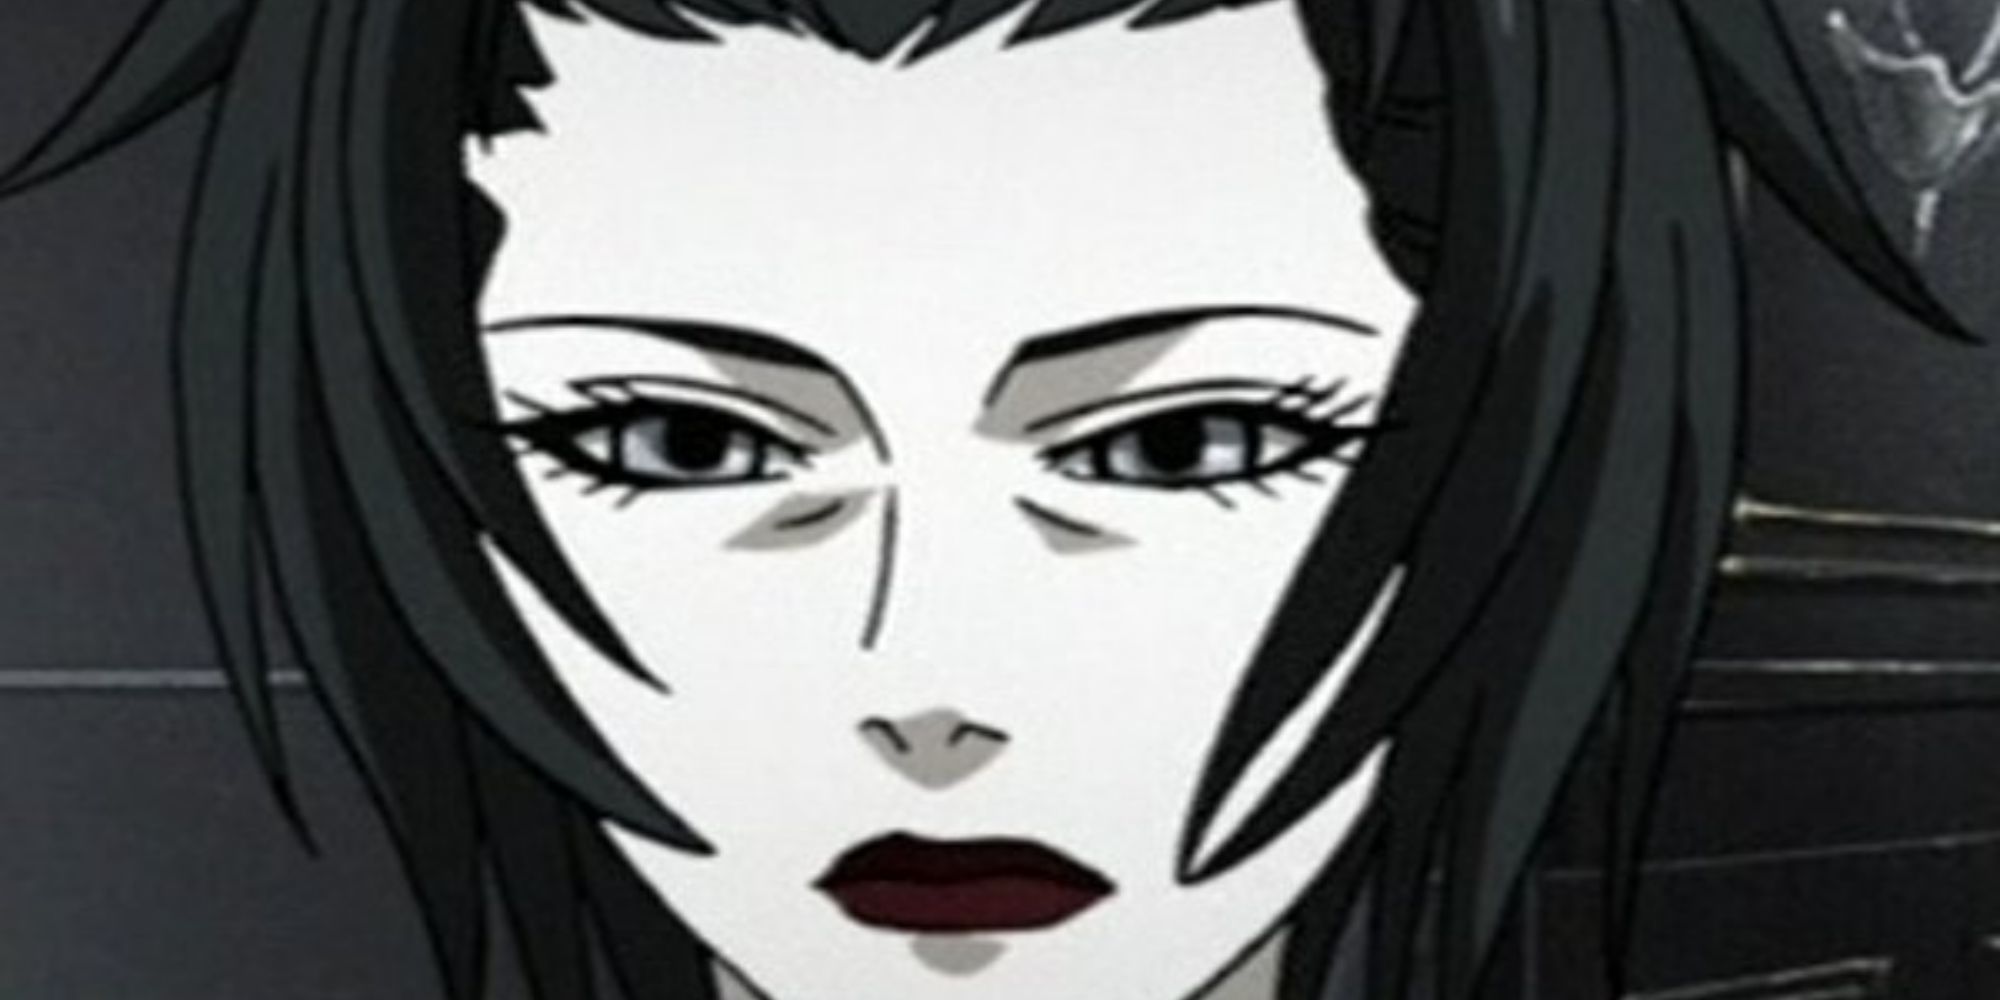 Close-up on a woman's face from Gilgamesh anime